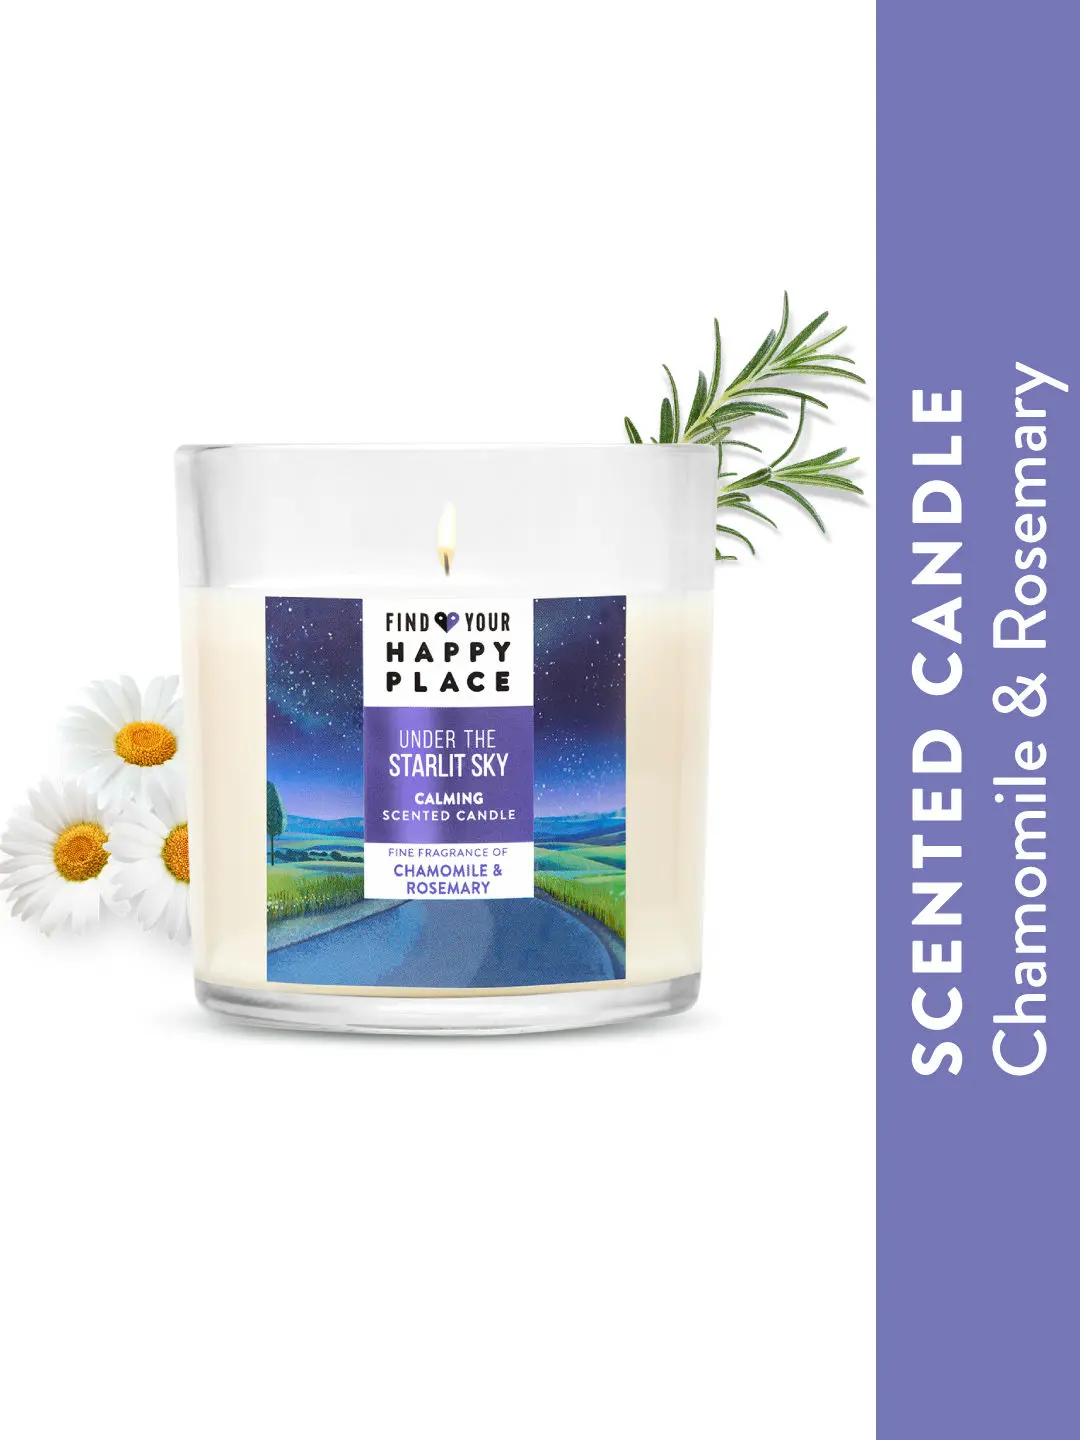 Find Your Happy Place - Under The Starlit Sky Scented Candle Chamomile & Rosemary, pure soy wax 200g